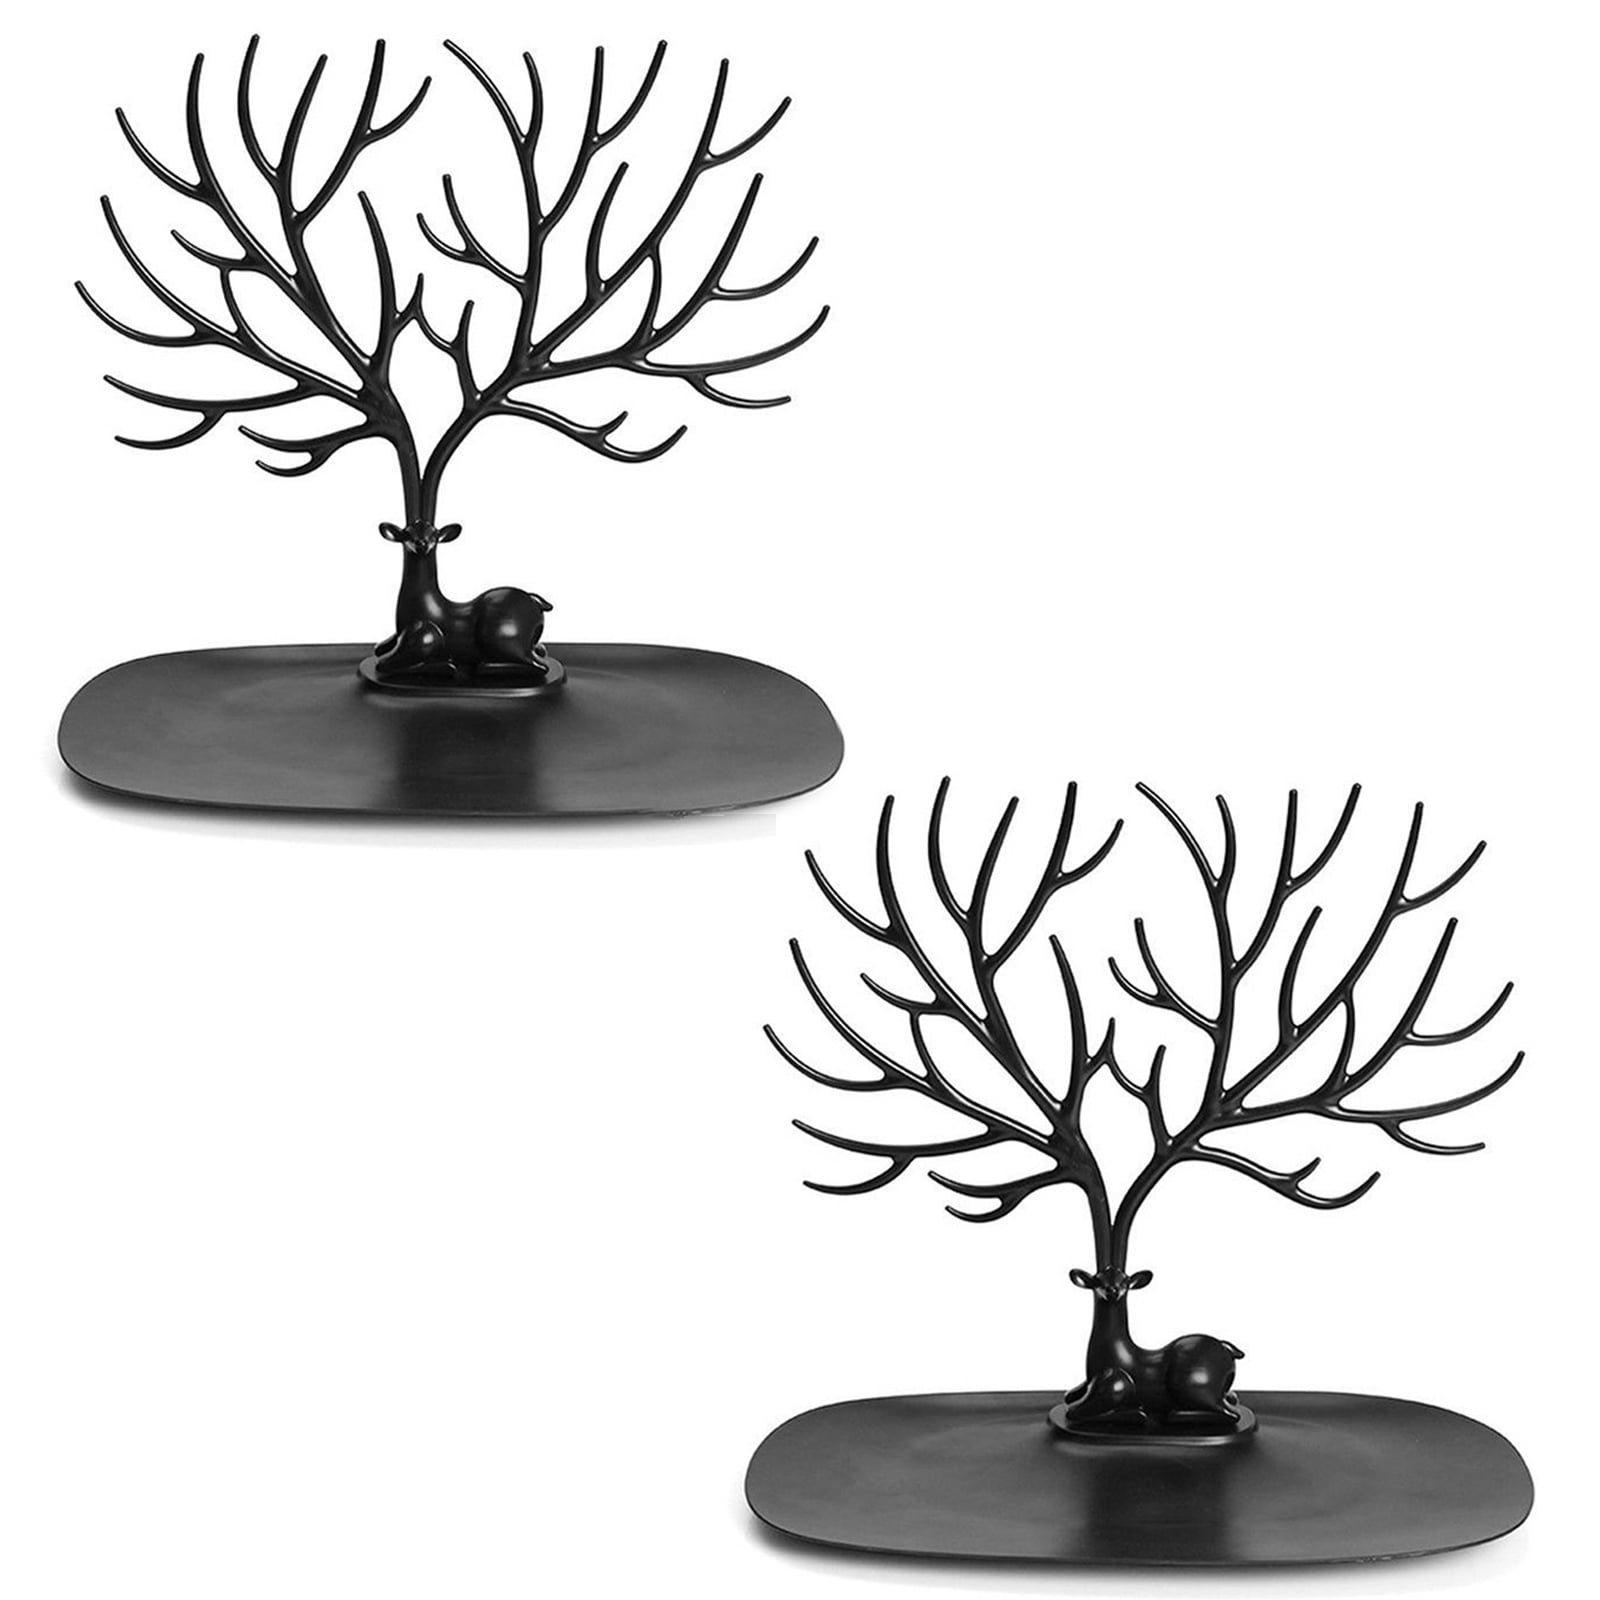 US Jewelry Deer Tree Stand Display Organizer Necklace Ring Earring Holder Rack 